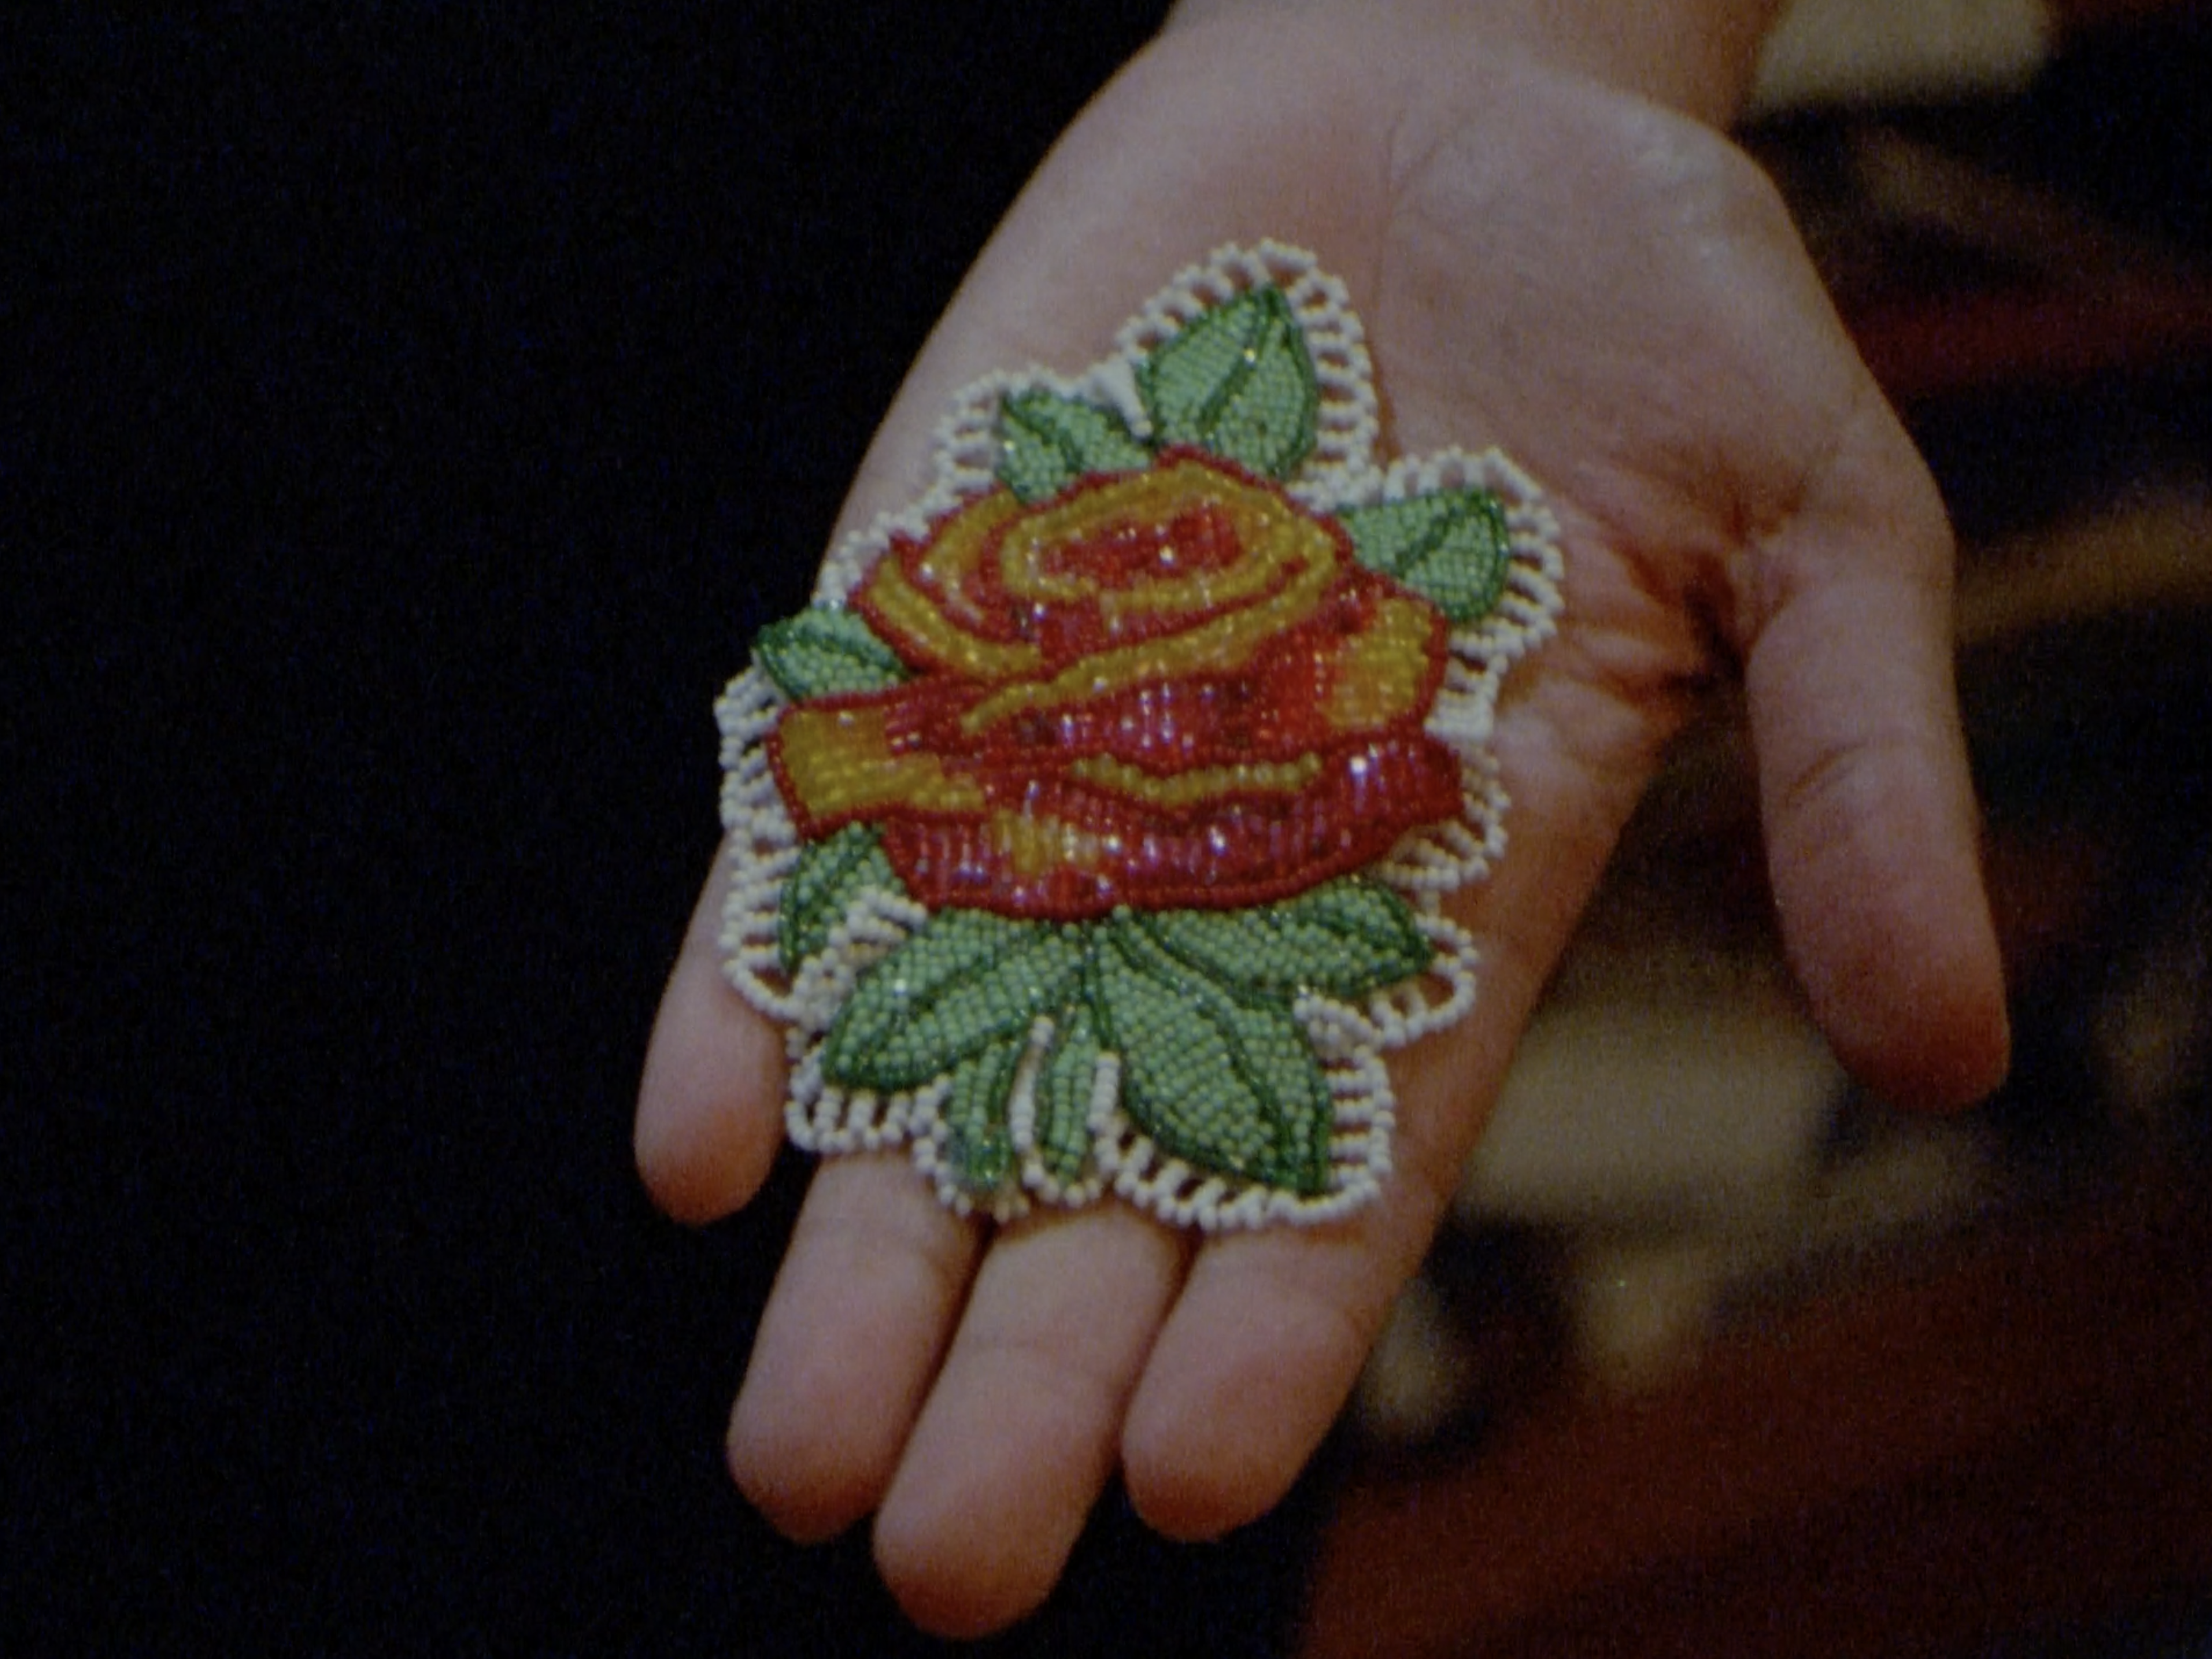 In the palm of a person with light skin is an extremely detailed red rose created entirely from tiny beads